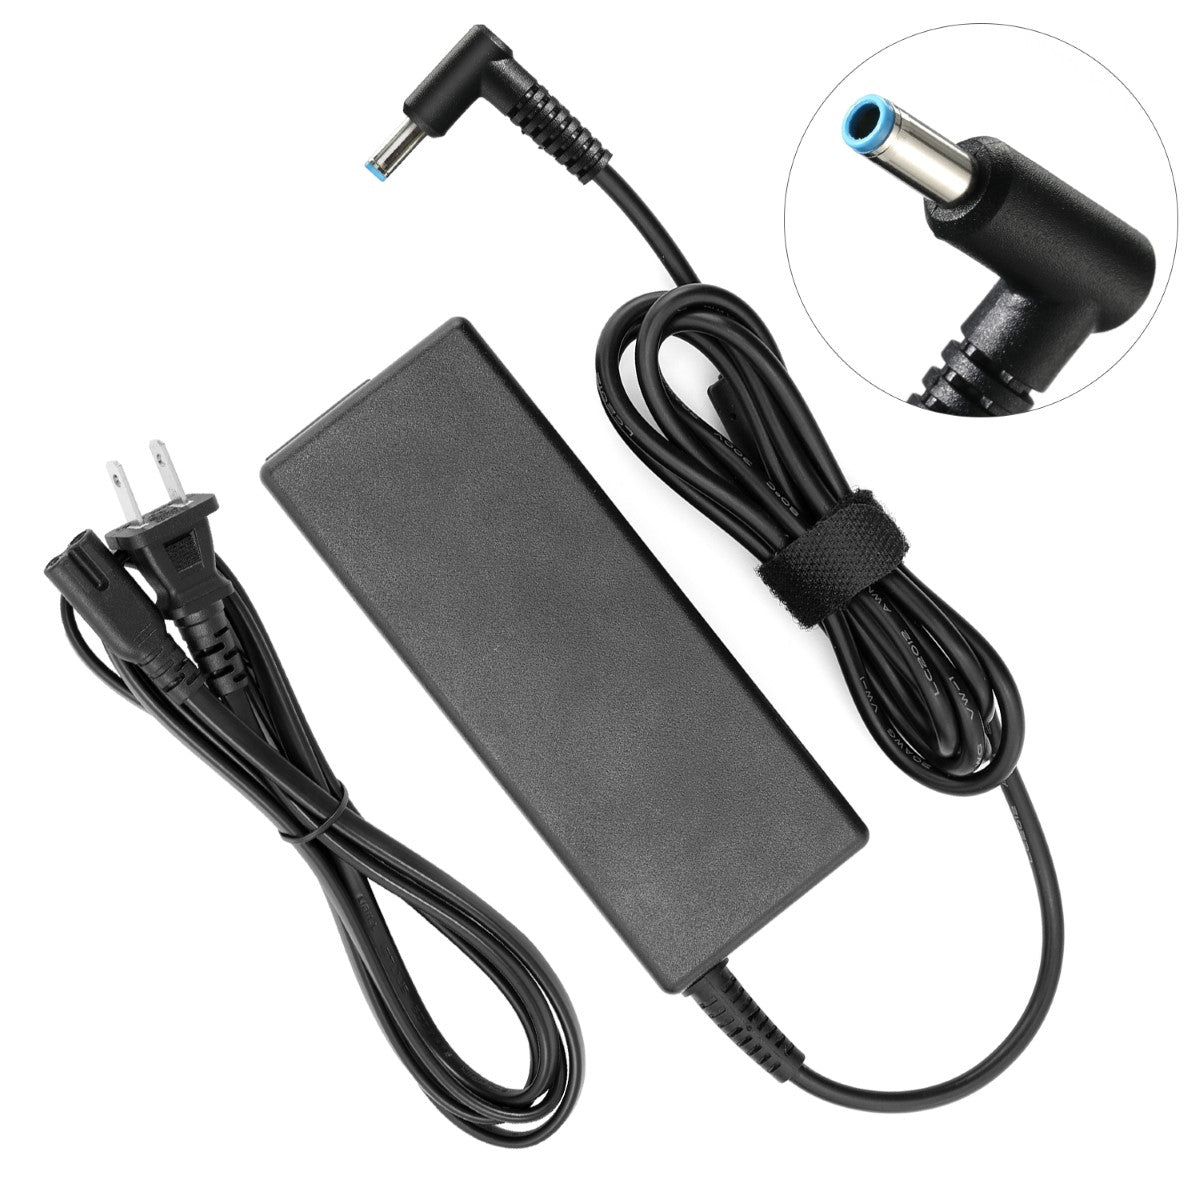 AC Adapter Charger for HP Envy Touchsmart 17-j010dx Notebook.